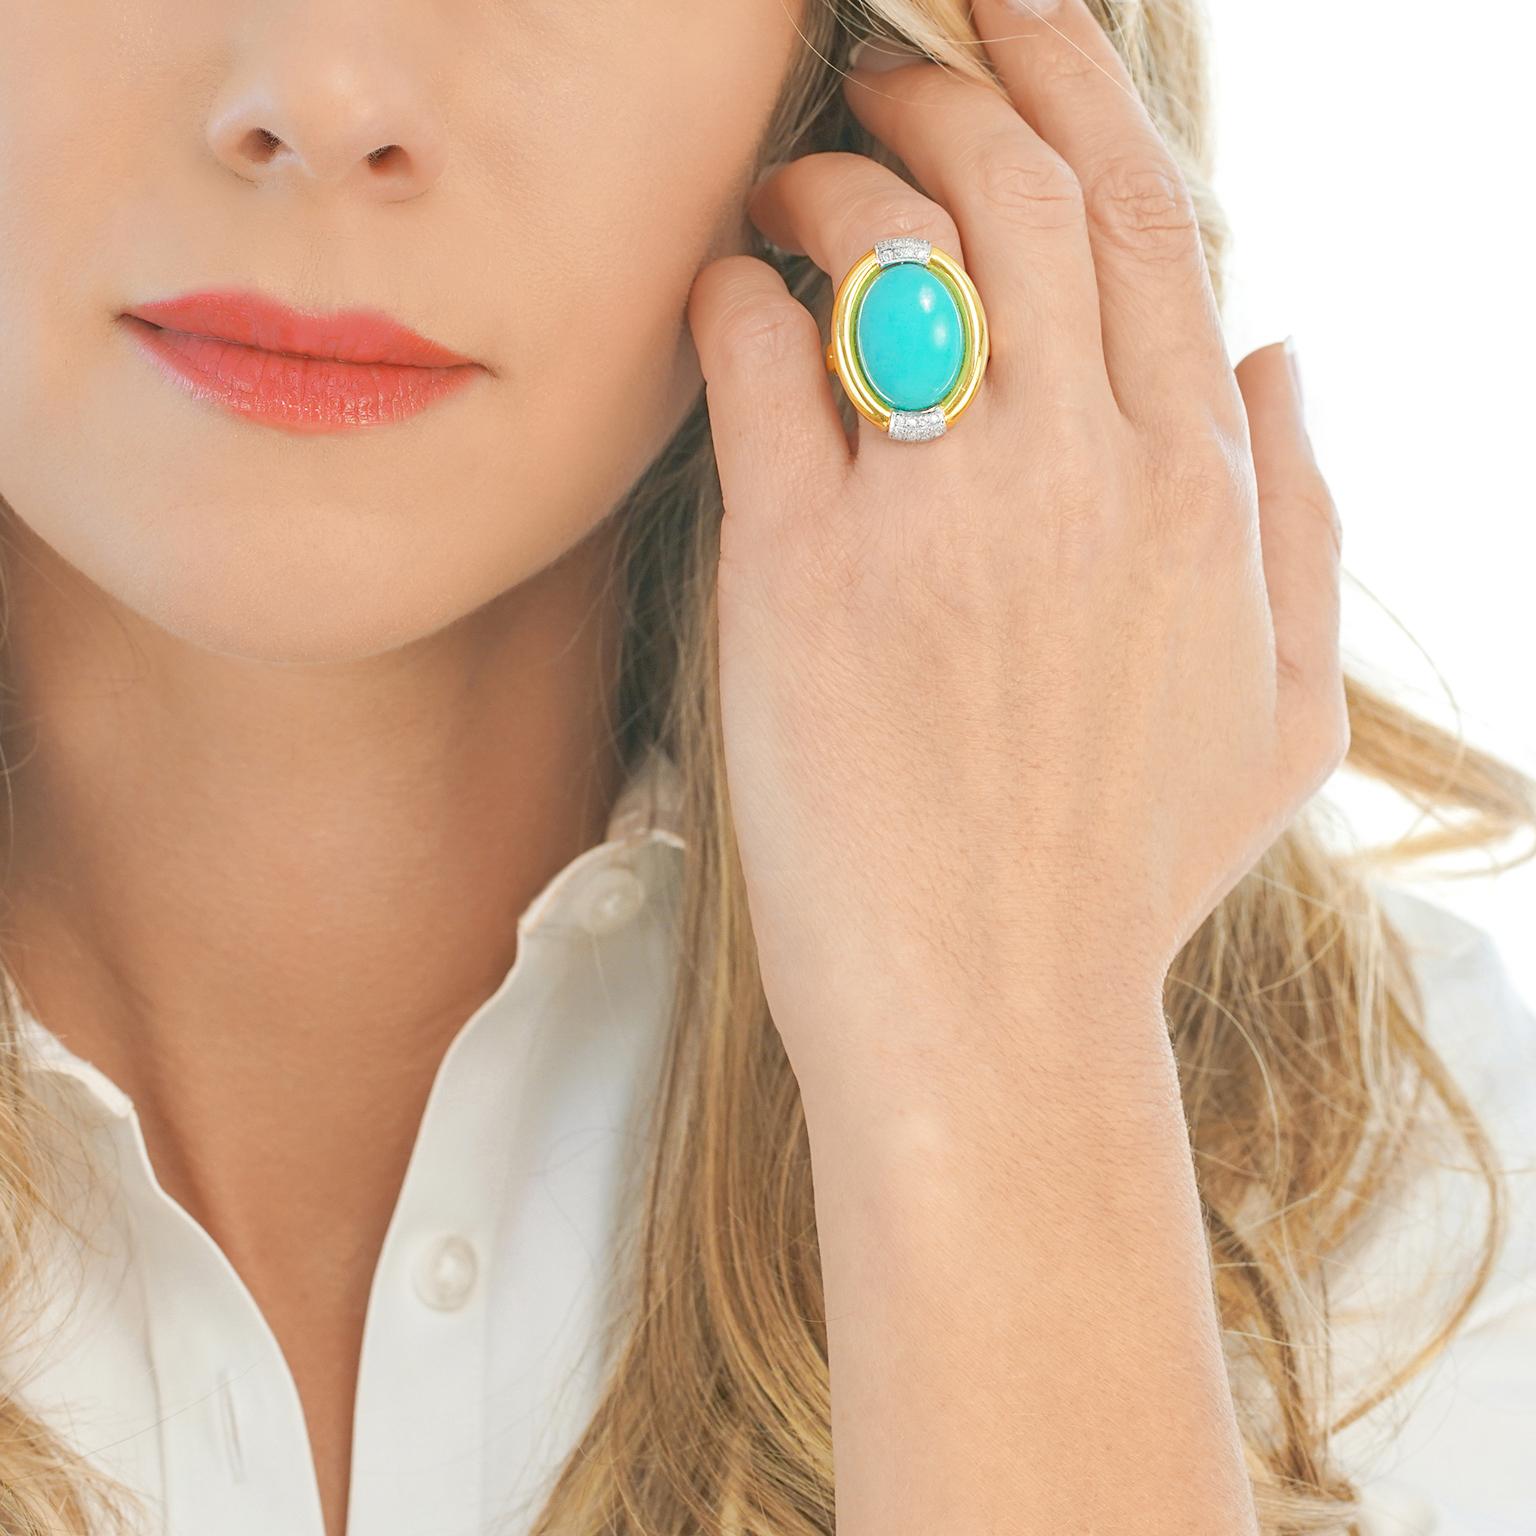 Circa 1960s, 14k, American. This elegant ring is set with a gorgeous sky blue Persian turquoise cabochon in a tailored gold frame trimmed with a sparkle of diamonds. The look is the stylishly put-together side of the sixties. Finely made, it is in